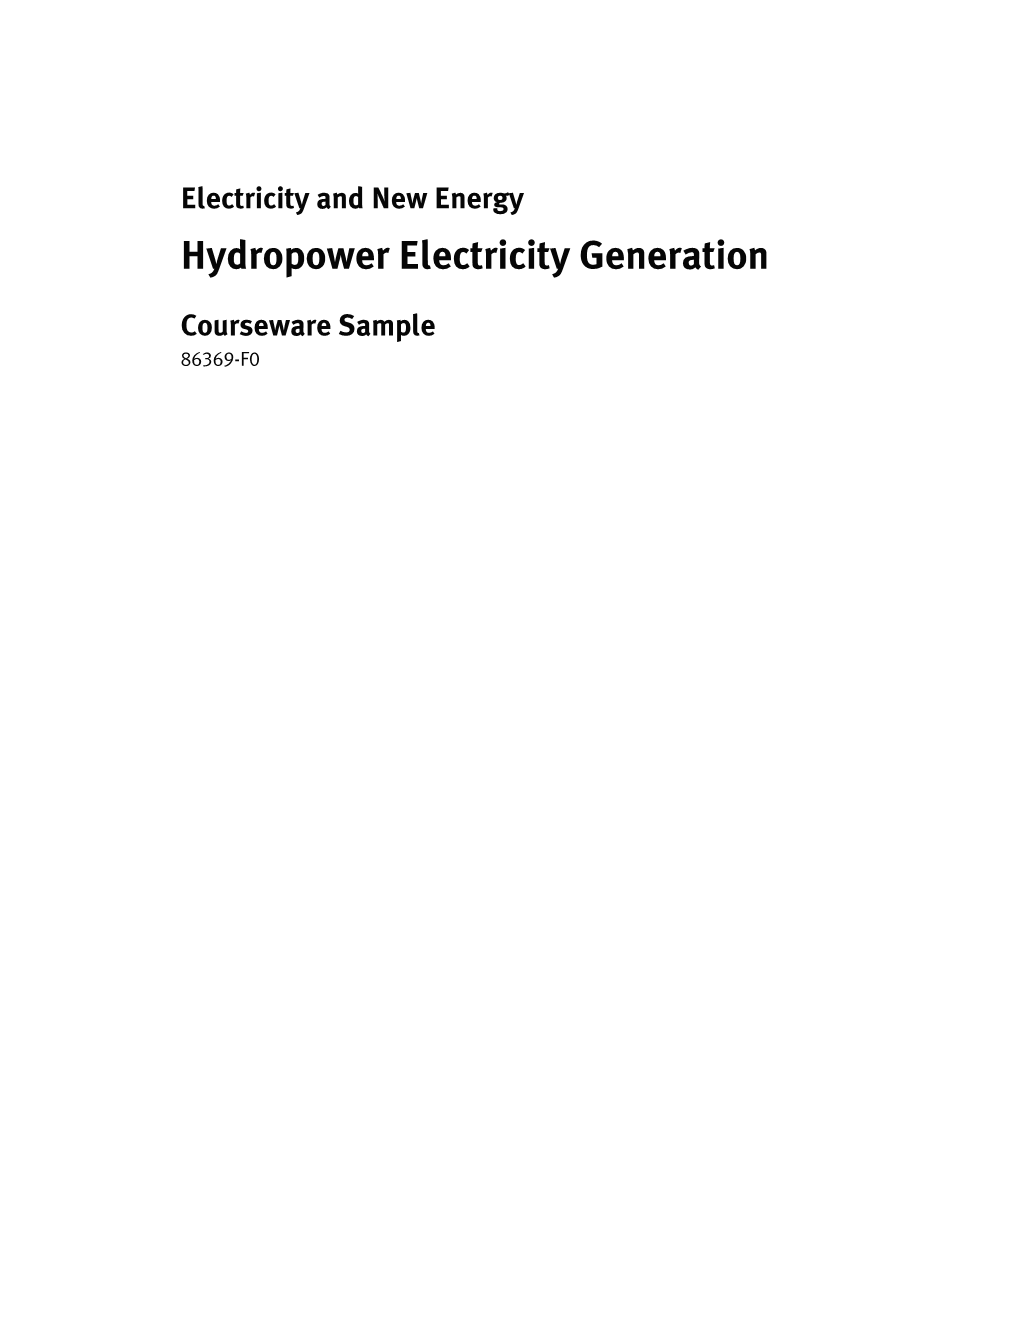 Hydropower Electricity Generation